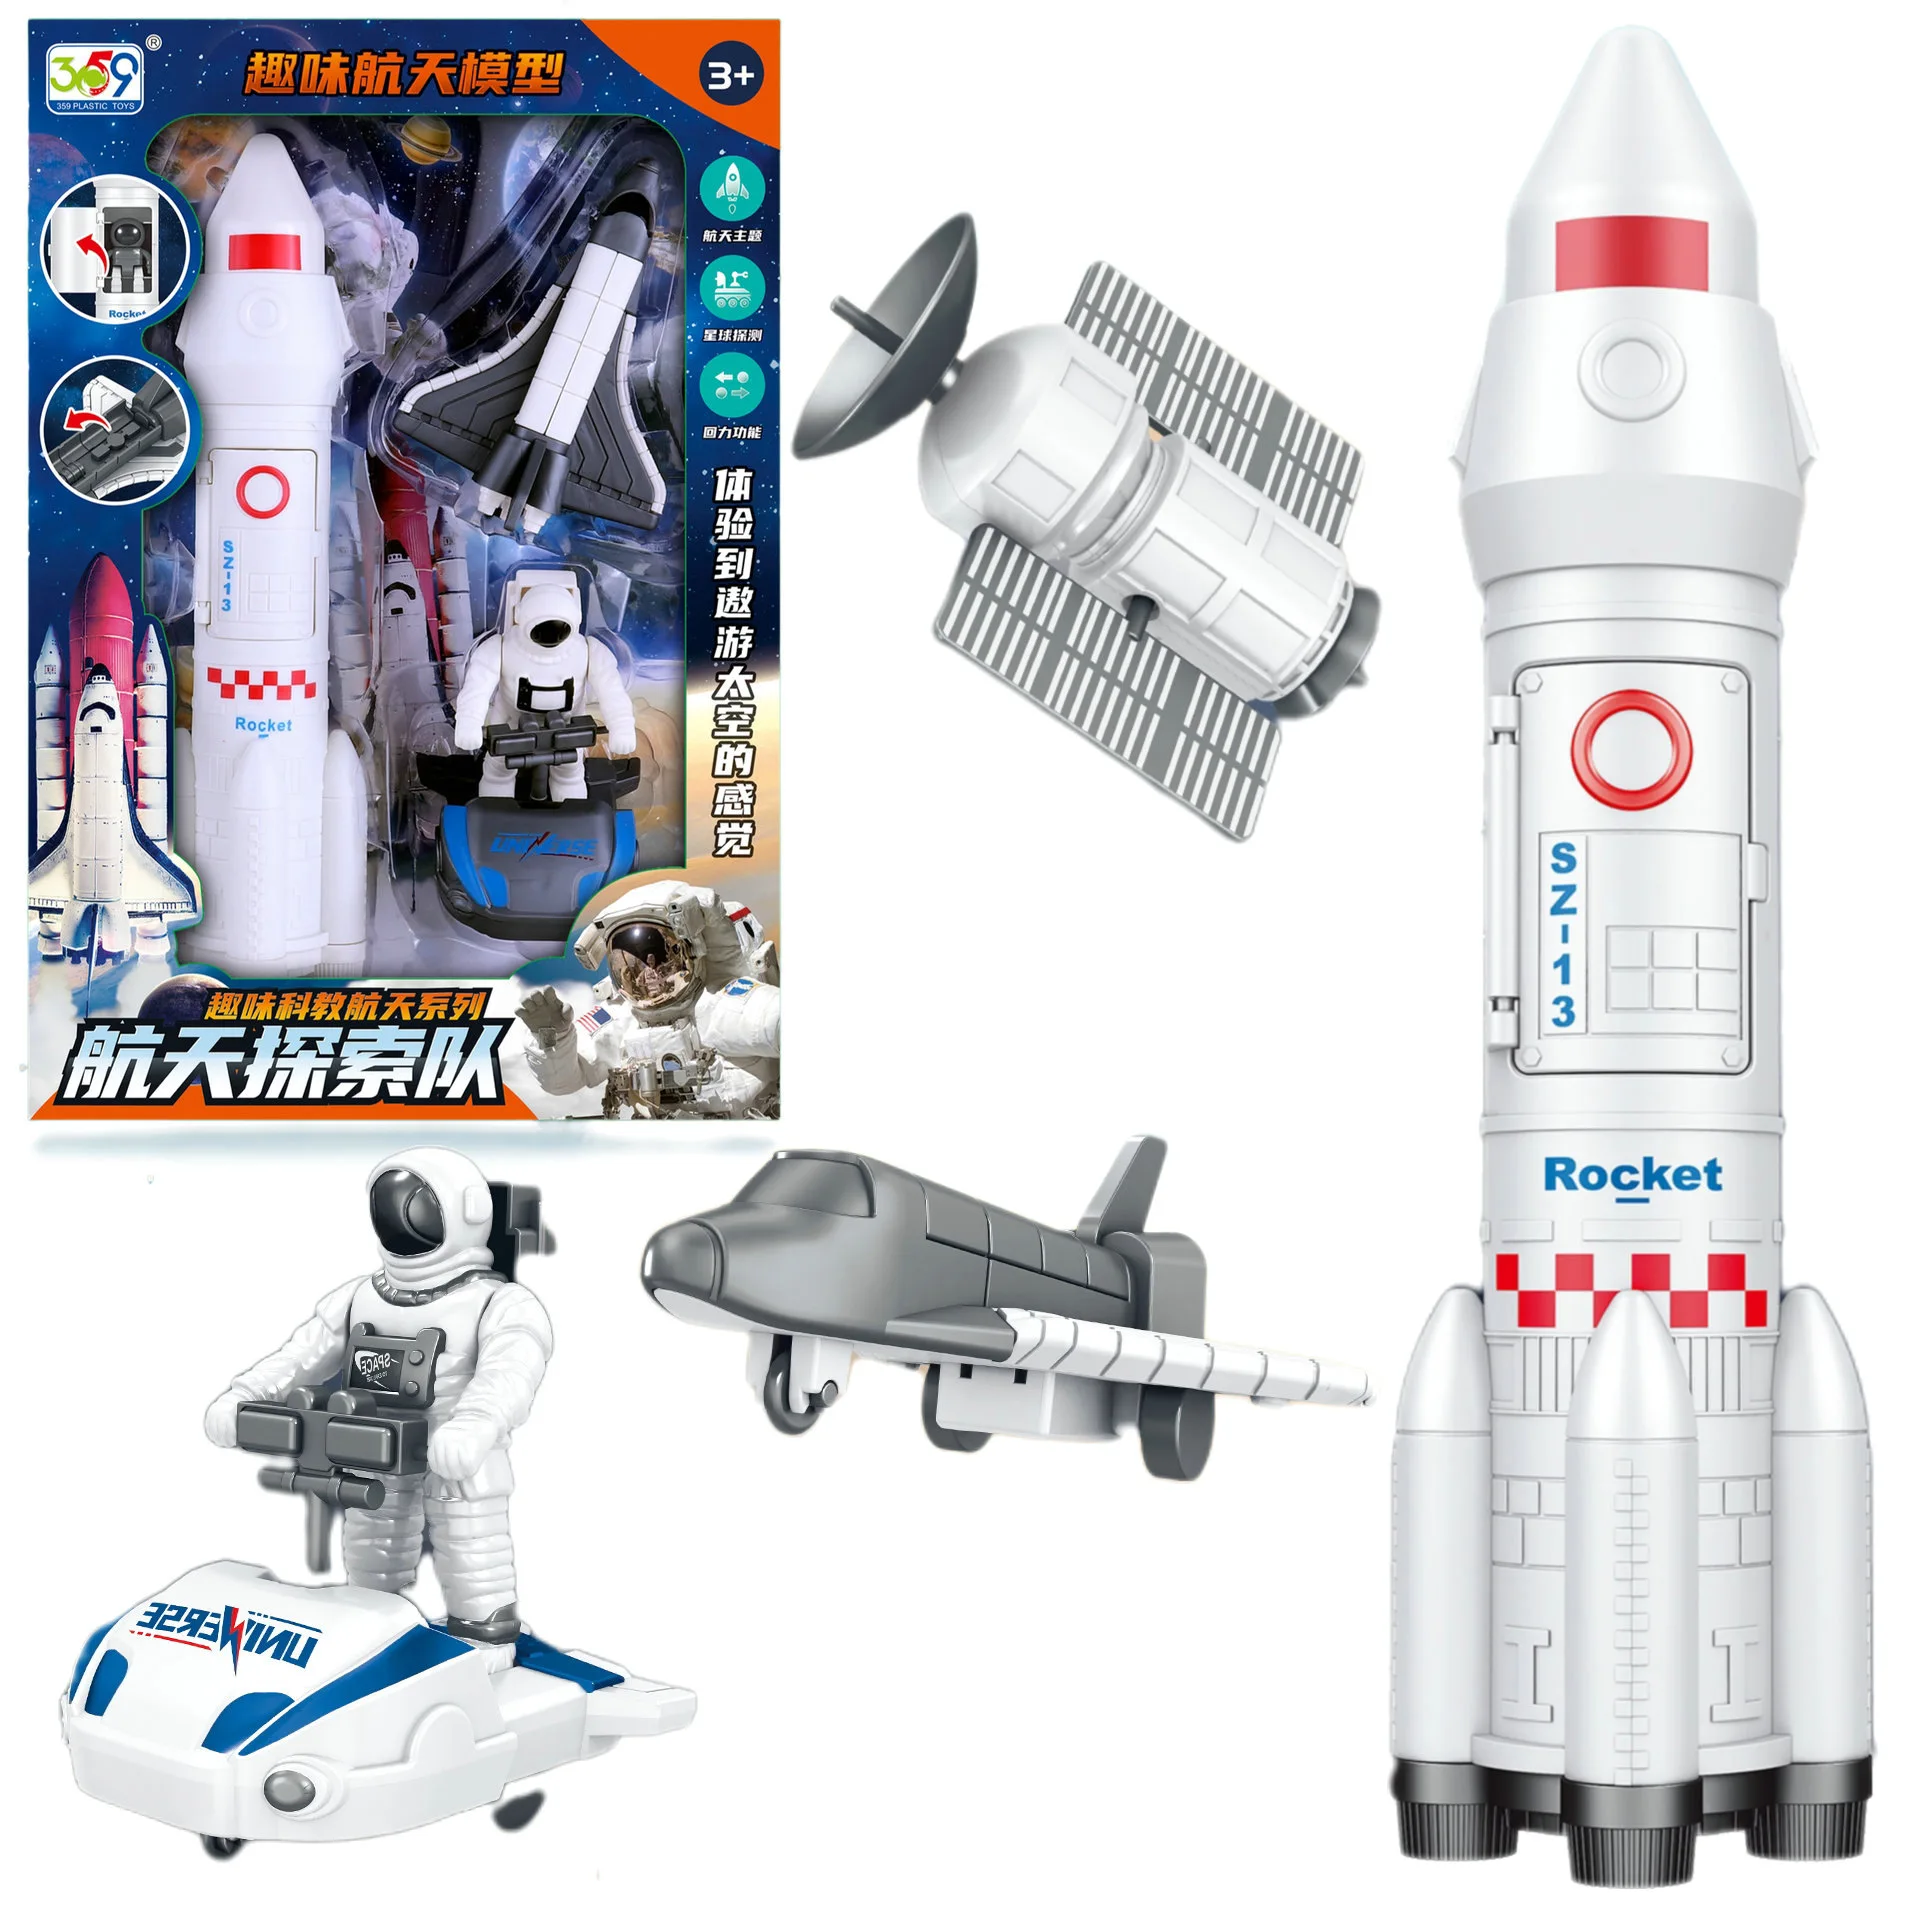 

Aircraft Model Simulation Rocket Toy Spacecraft Space Exploration Team Spaceship Blast Off Educational Toys For Kids